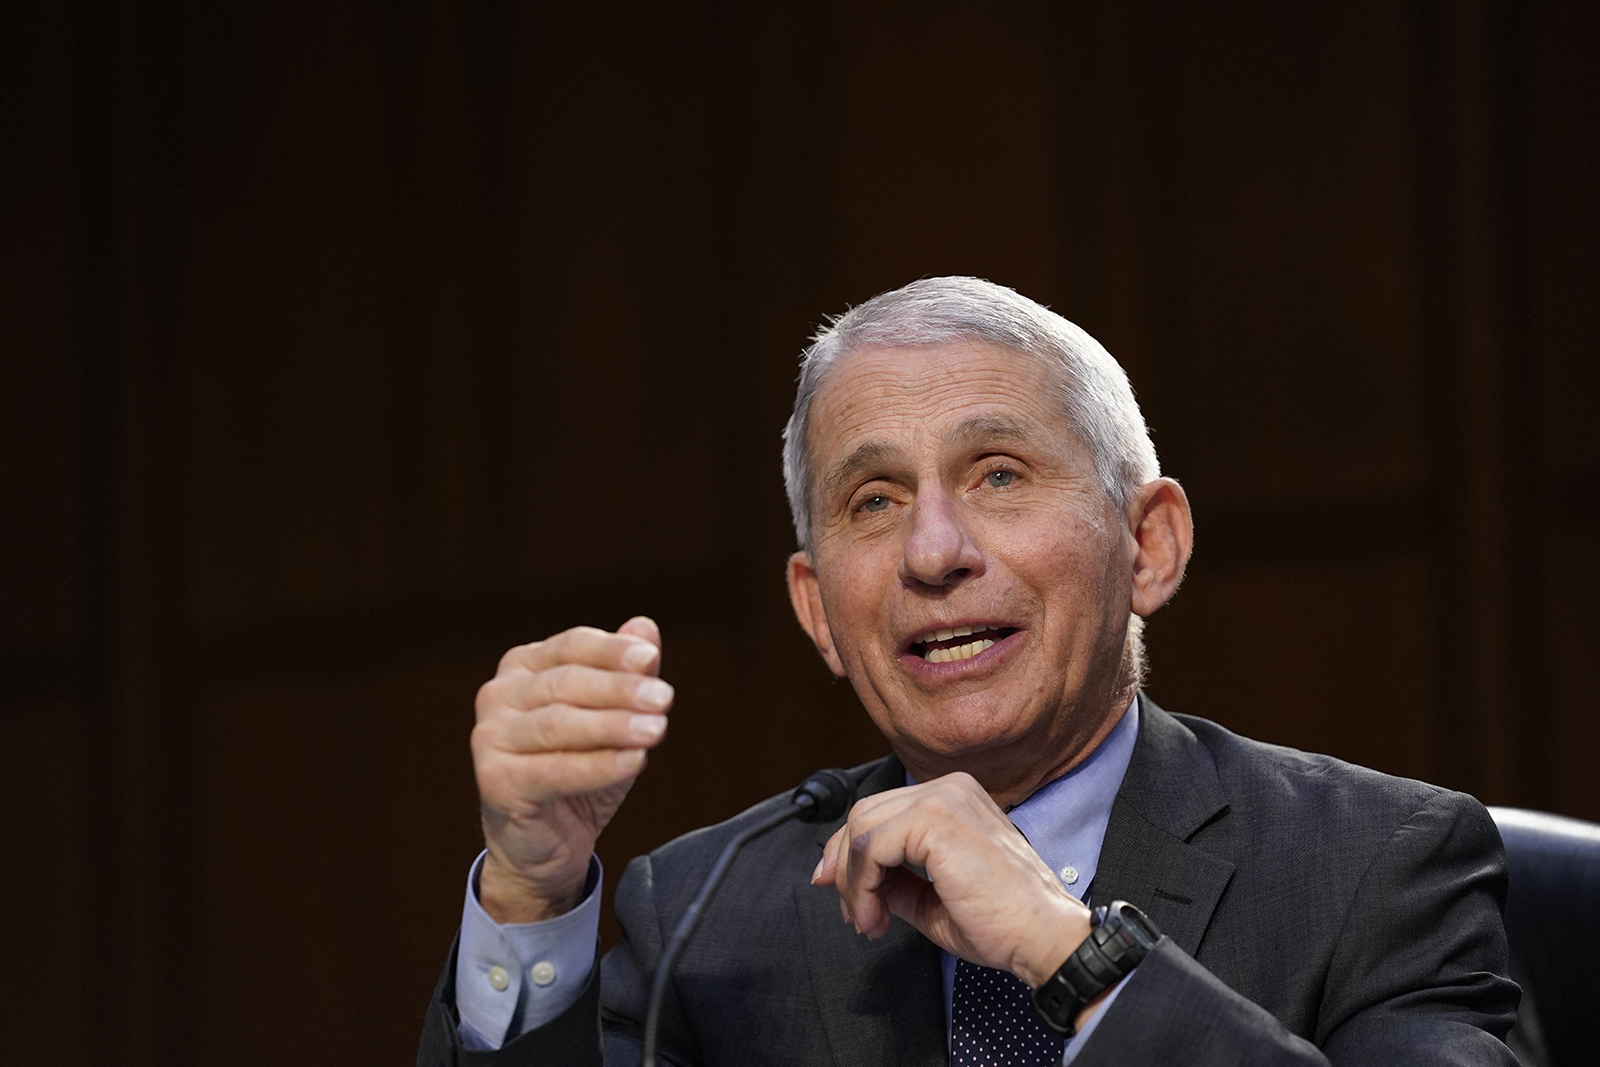 Dr. Anthony Fauci, head of the National Institute of Allergy and Infectious Diseases, testifies during a Senate Health, Education, Labor and Pensions Committee hearing on the federal coronavirus response on Capitol Hill in Washington, DC, on March 18.